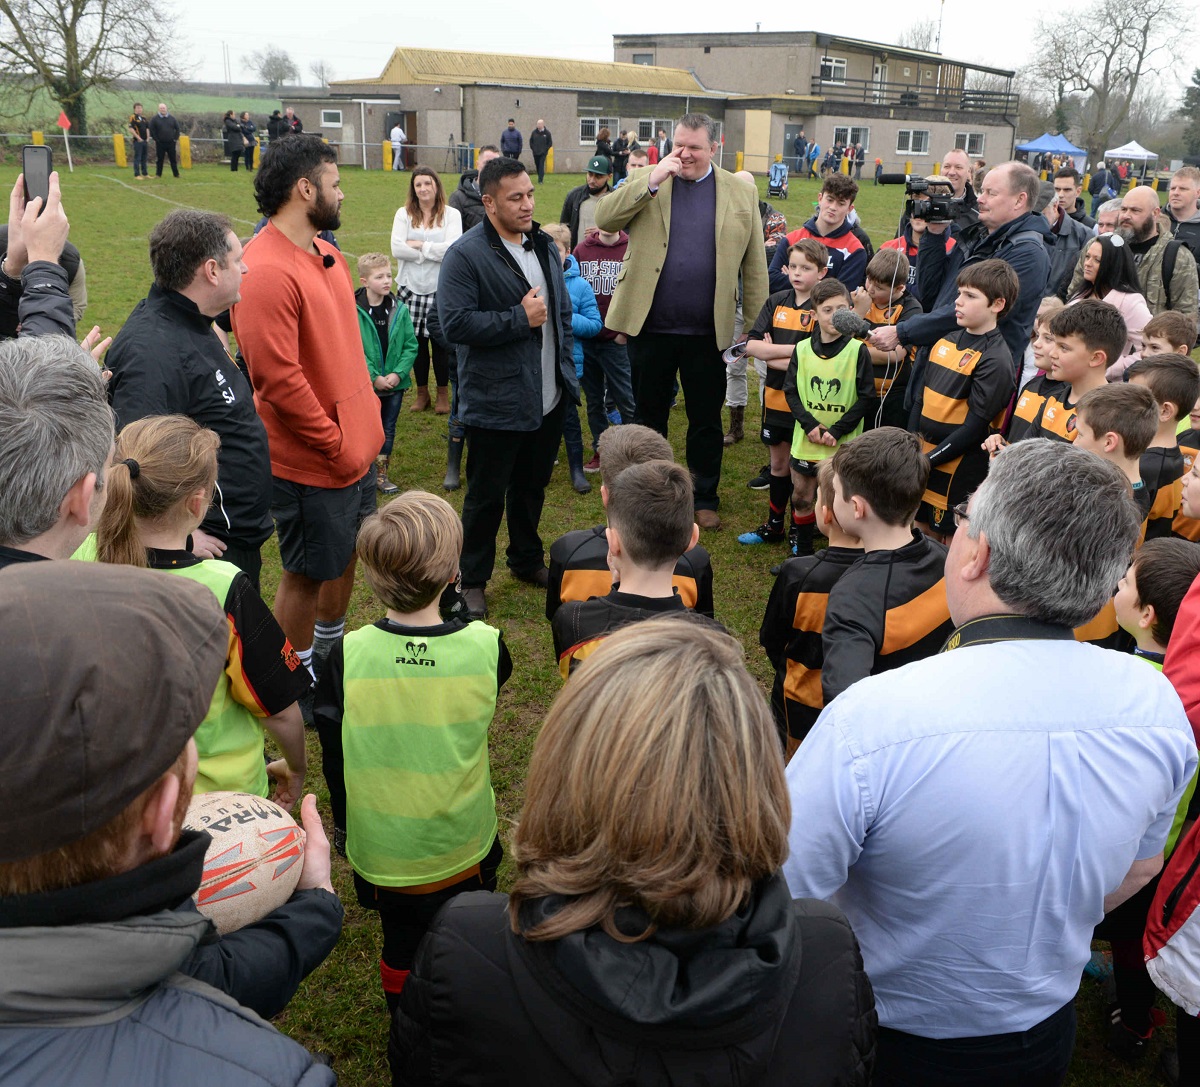 RUGBY: Thornbury celebrate great accolade as Vunipola brothers ... - Gazette Series